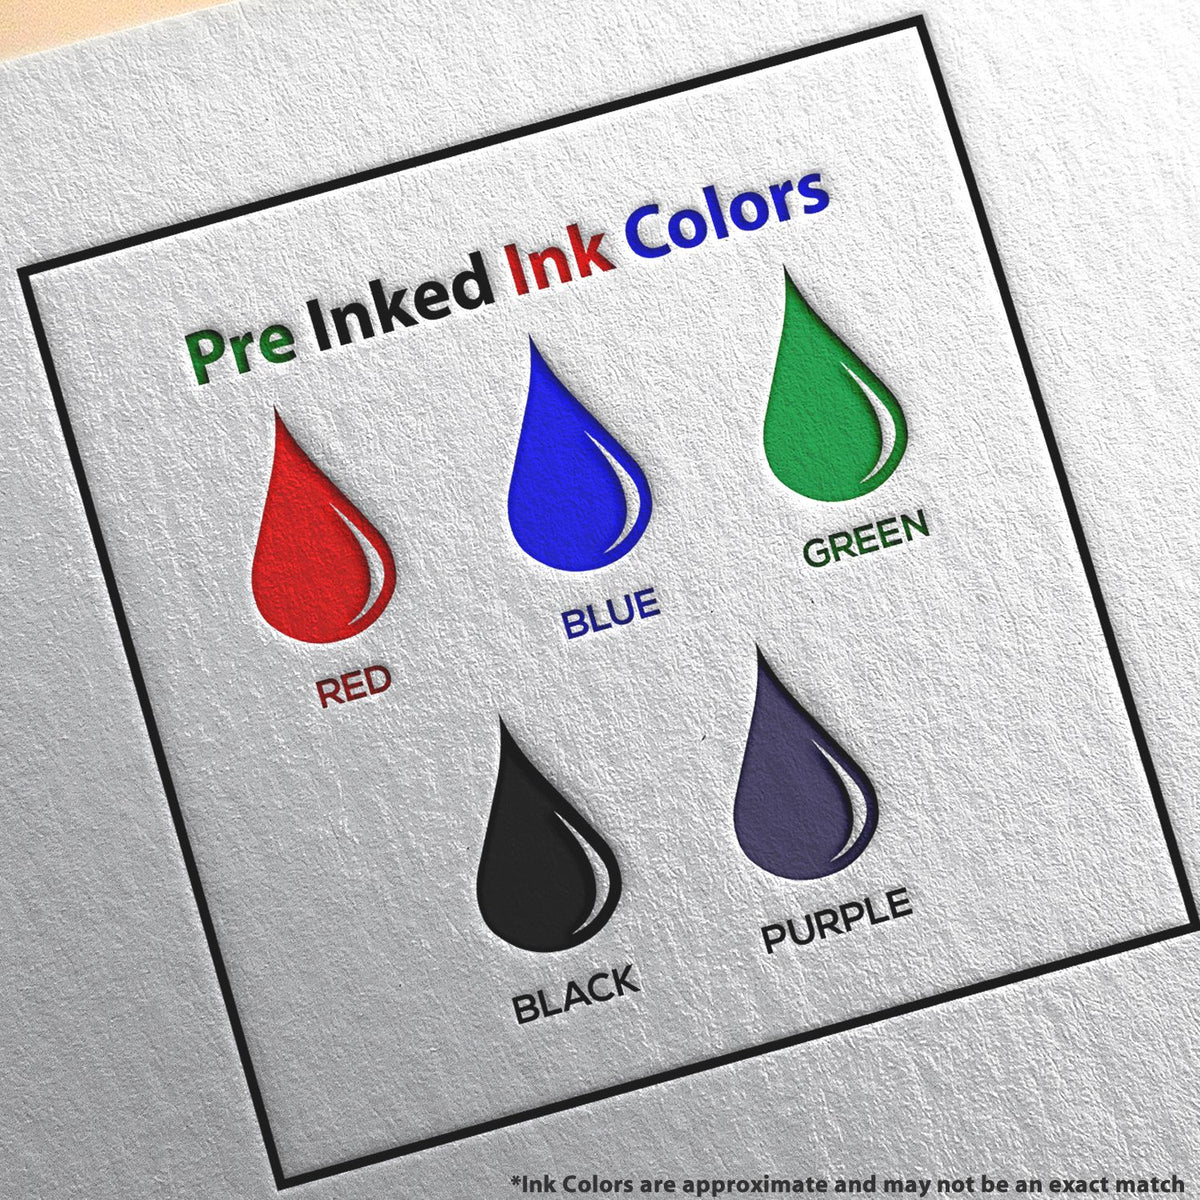 A picture showing the different ink colors or hues available for the Slim Pre-Inked South Carolina Professional Engineer Seal Stamp product.